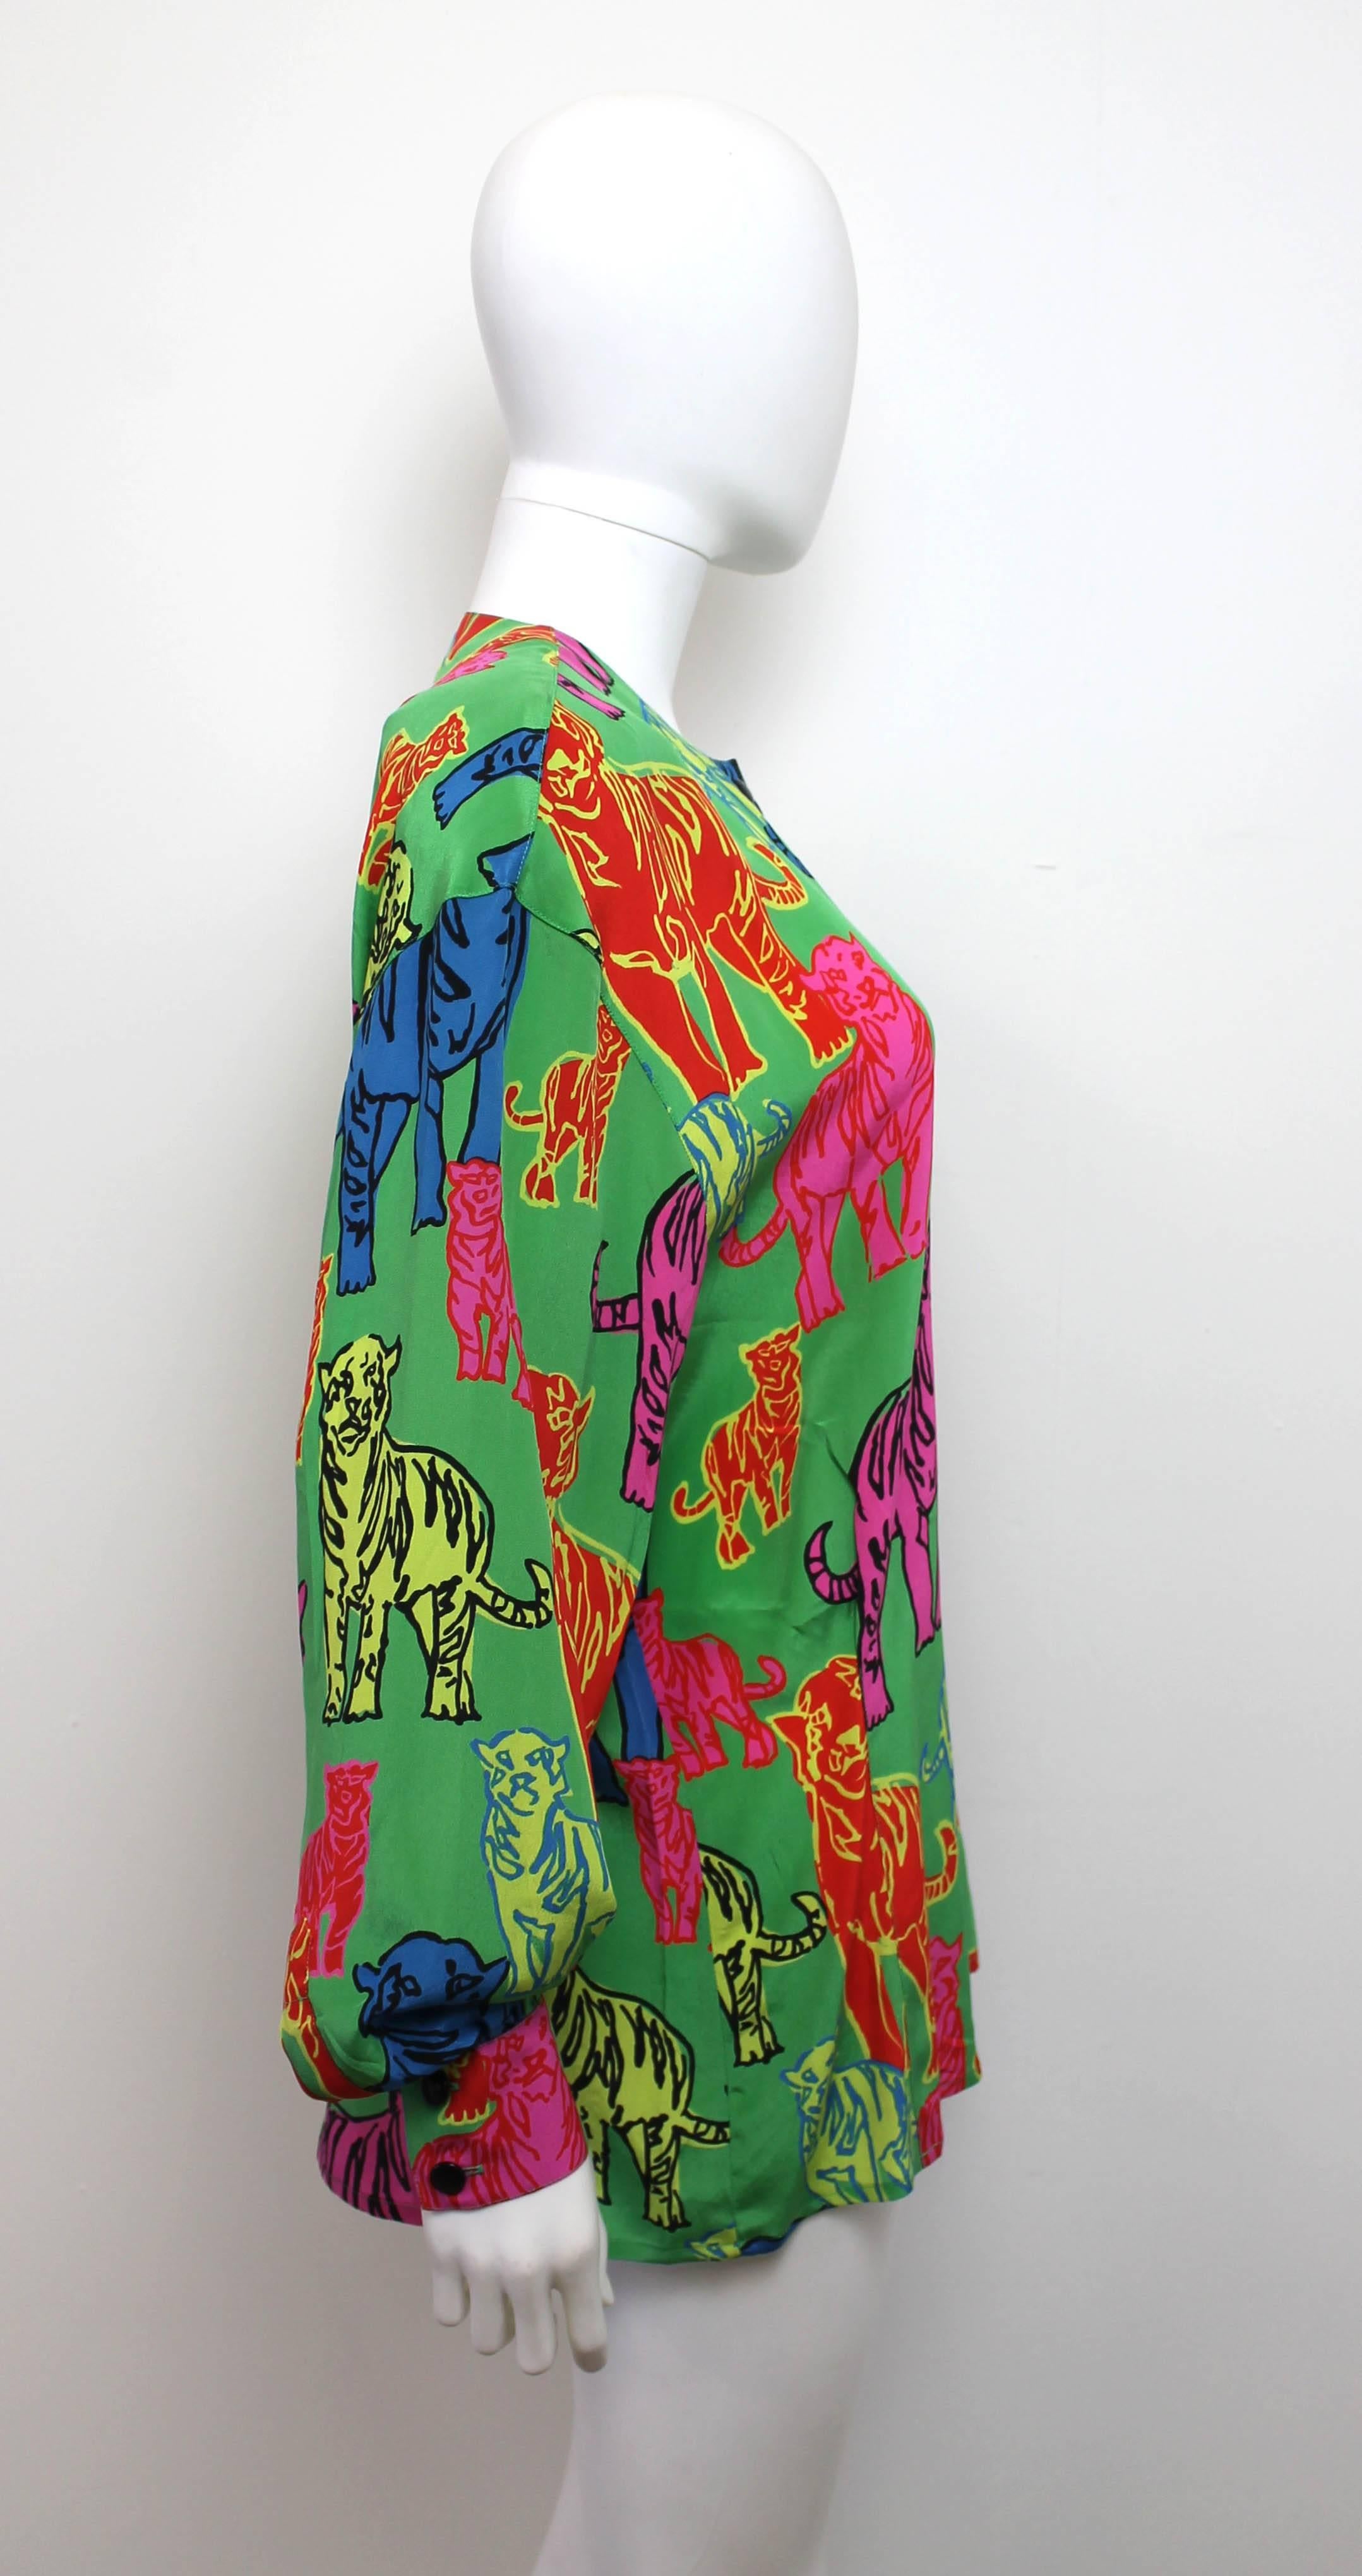 Vibrant and playful shirt by Escada from the late 1980's. The collarless shirt features a cartoon-like multi-color tiger motif. Has small shoulder pads.